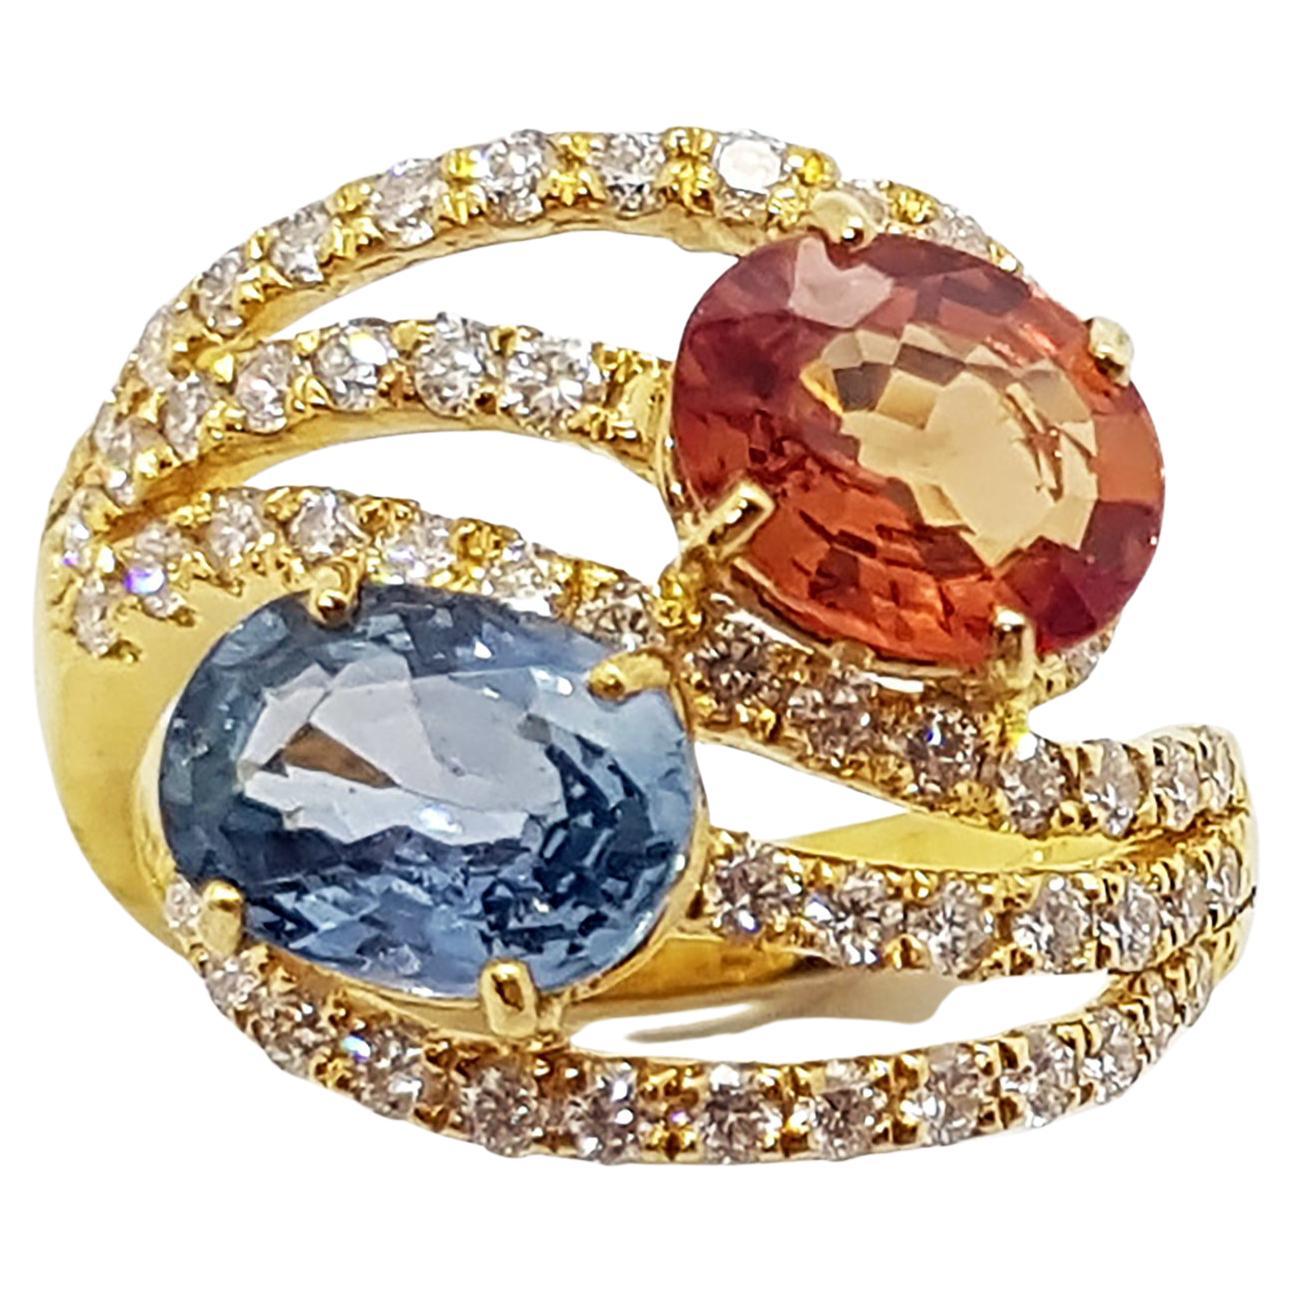 Multi-Color Sapphire with Diamond Ring Set in 18 Karat Gold Settings